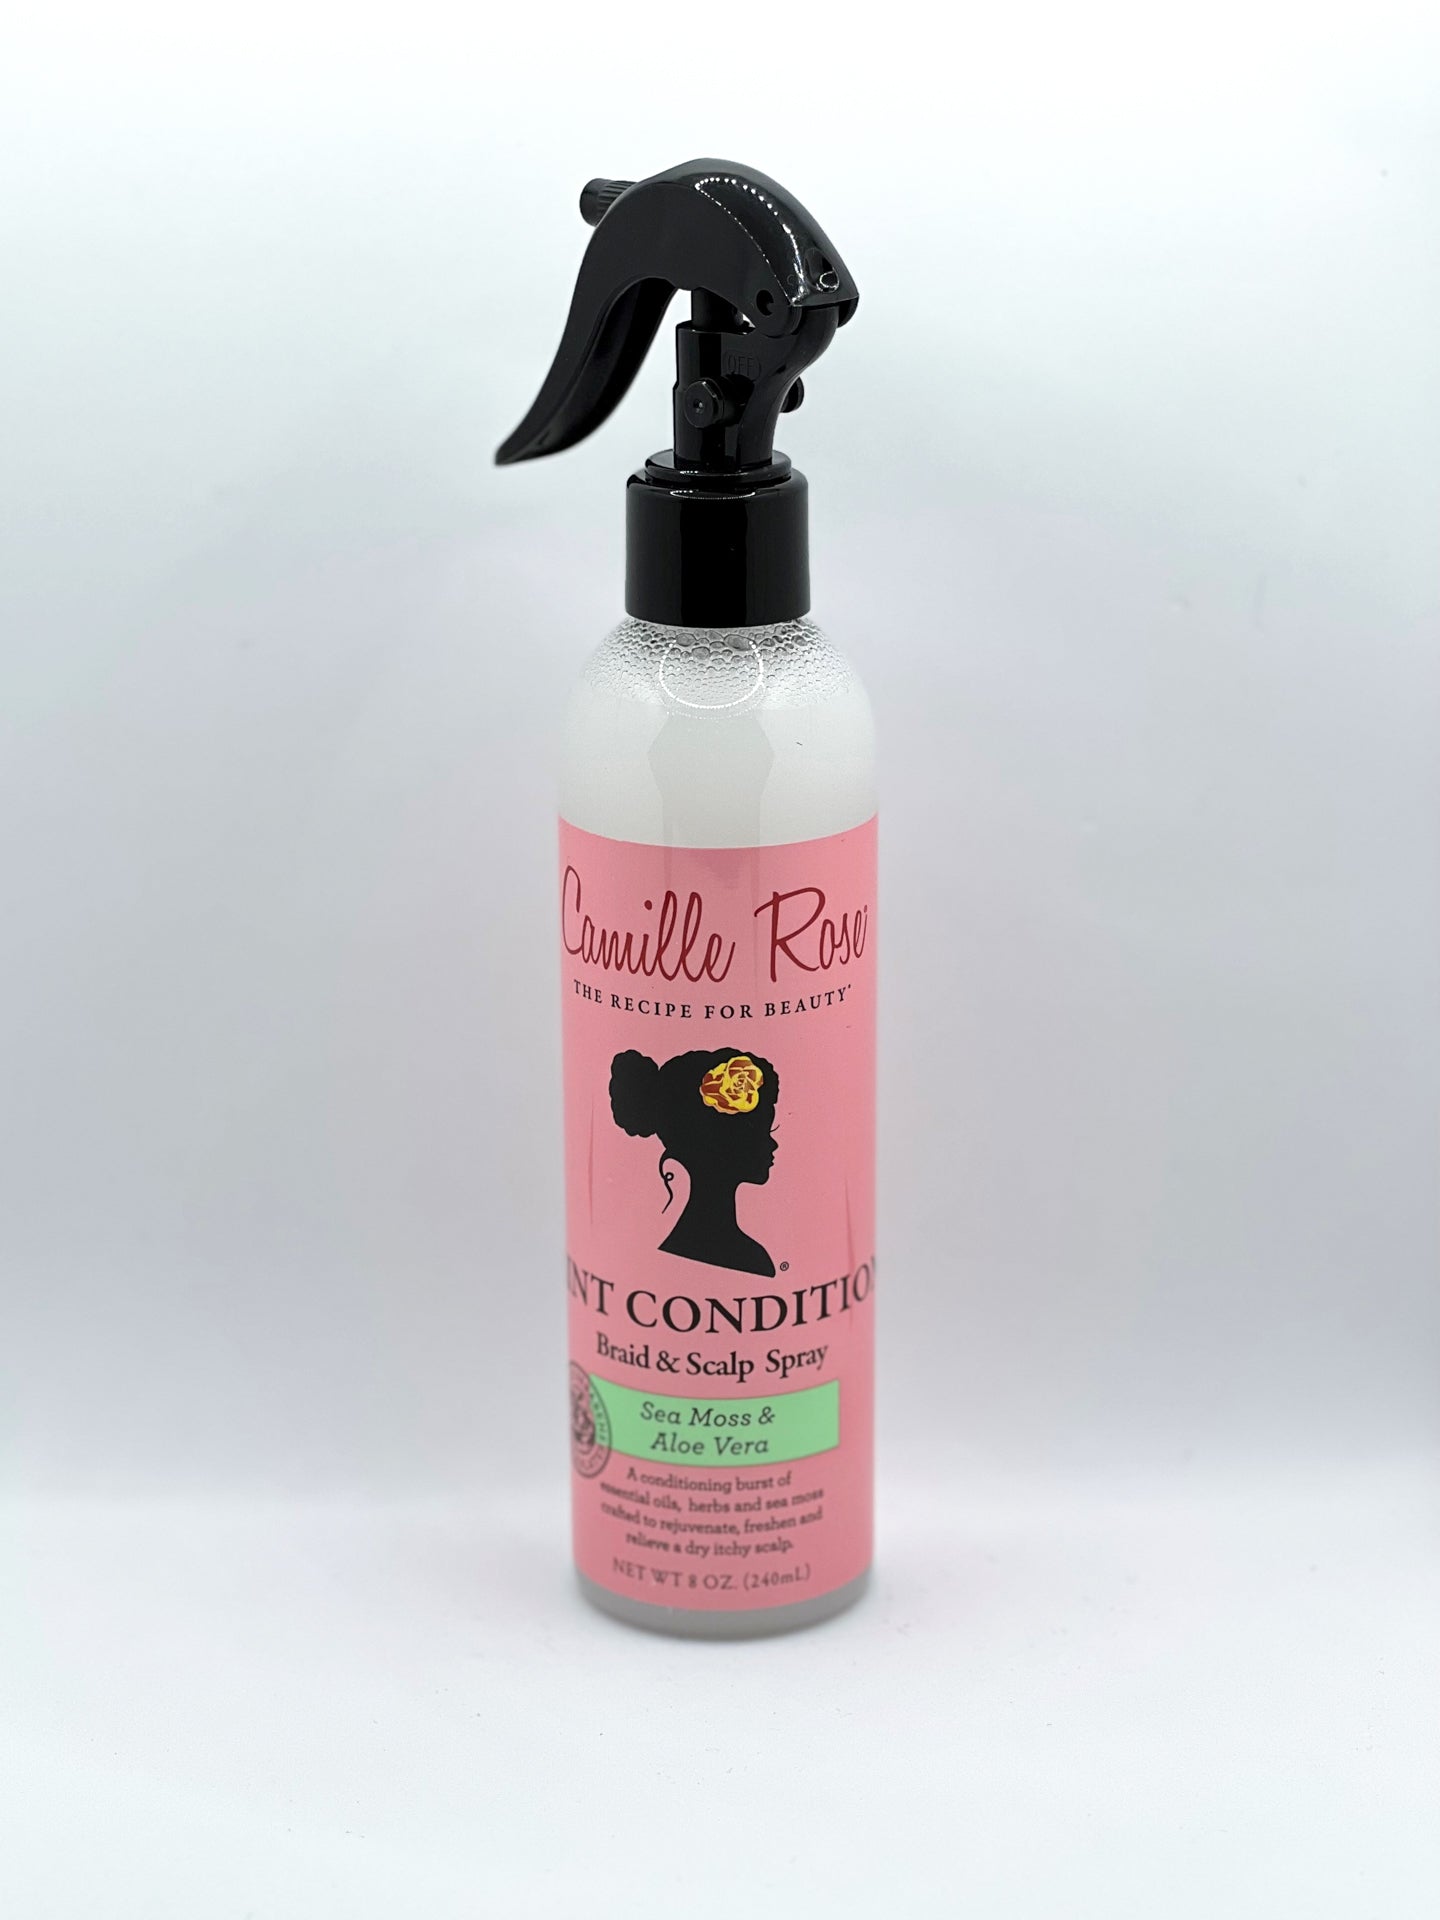 Mint Condition Braid and Scalp Spray